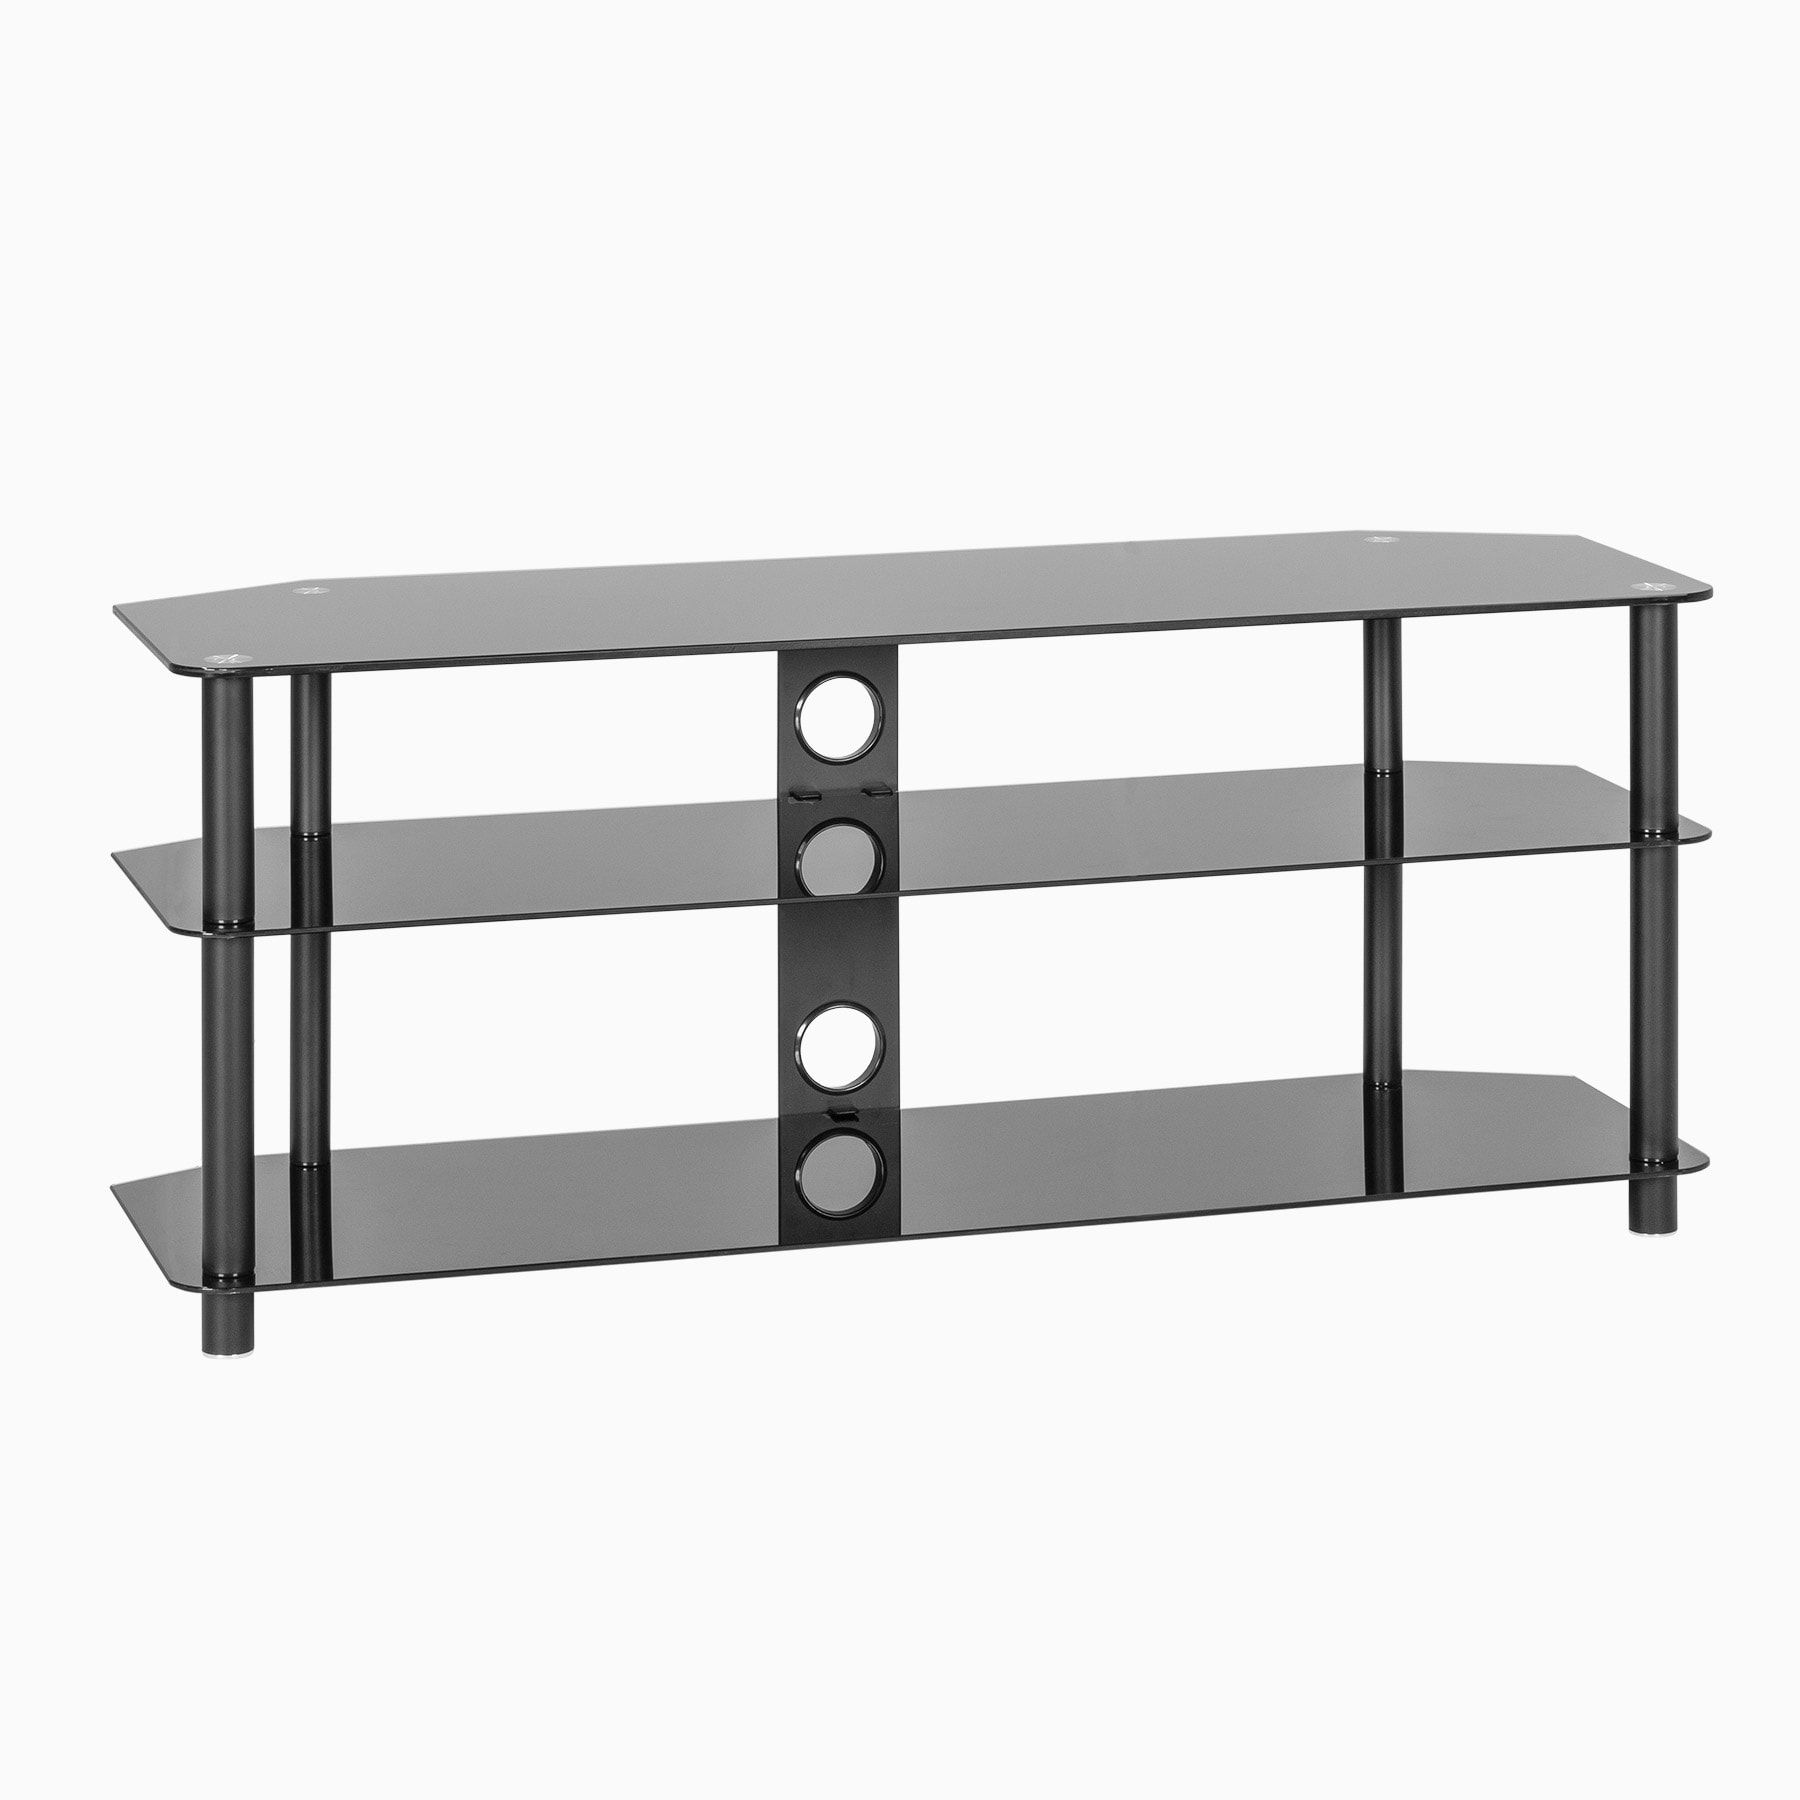 Black Glass Corner Tv Stand Up To 60 Inch Tv | Mmt Zgbb1200 With Regard To Glass Shelves Tv Stands For Tvs Up To 50" (View 4 of 15)